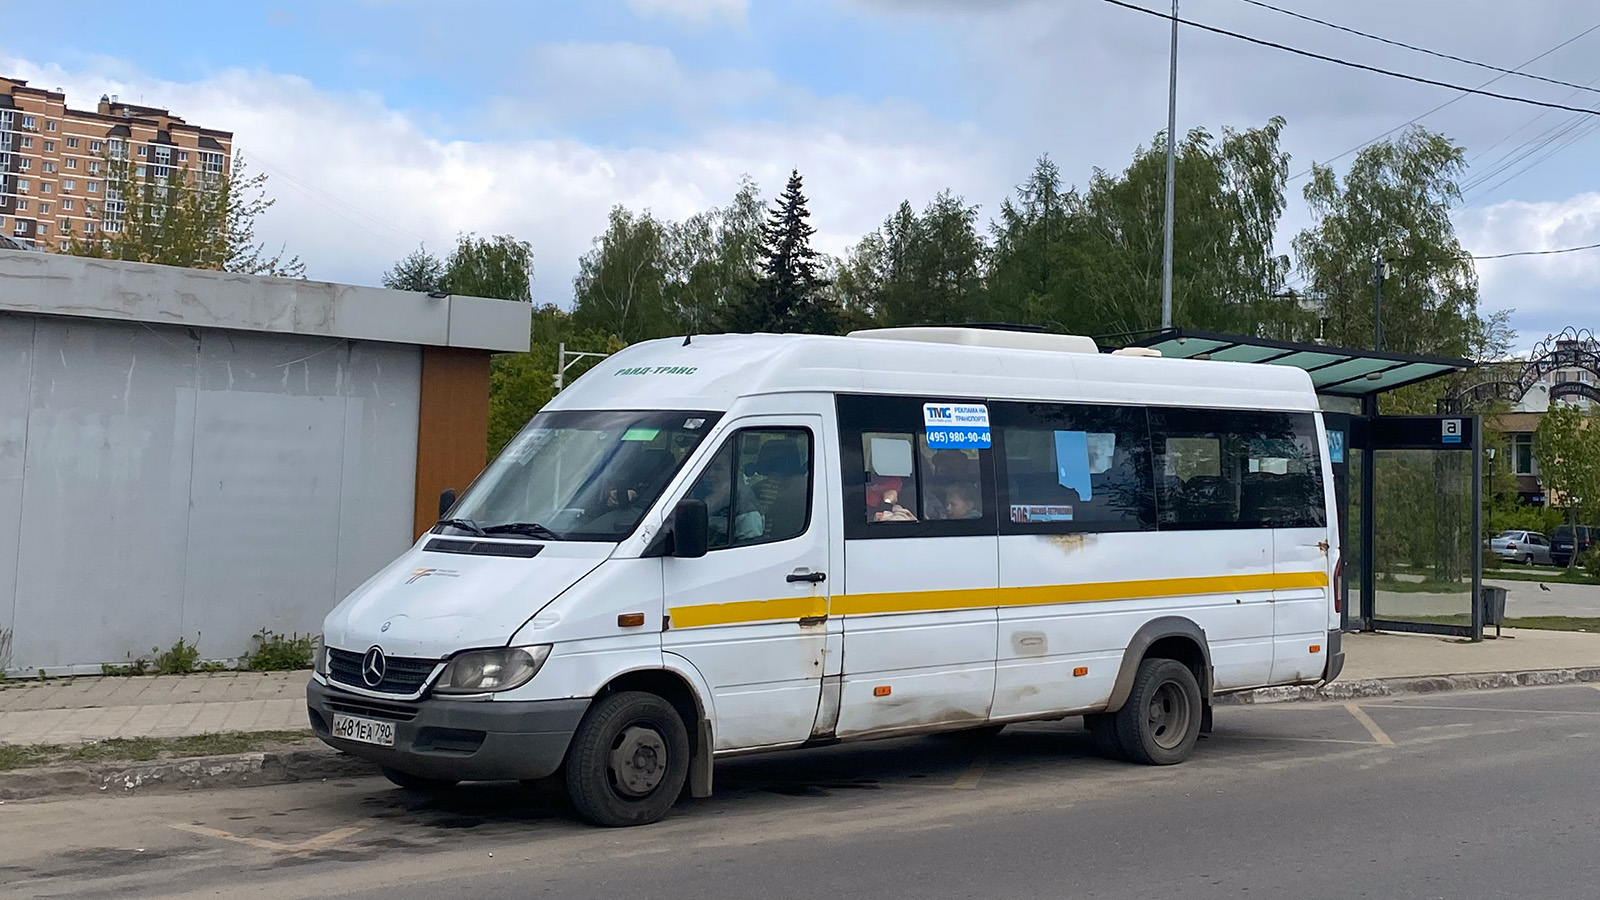 Moscow region, Luidor-223237 (MB Sprinter Classic) # А 481 ЕА 790